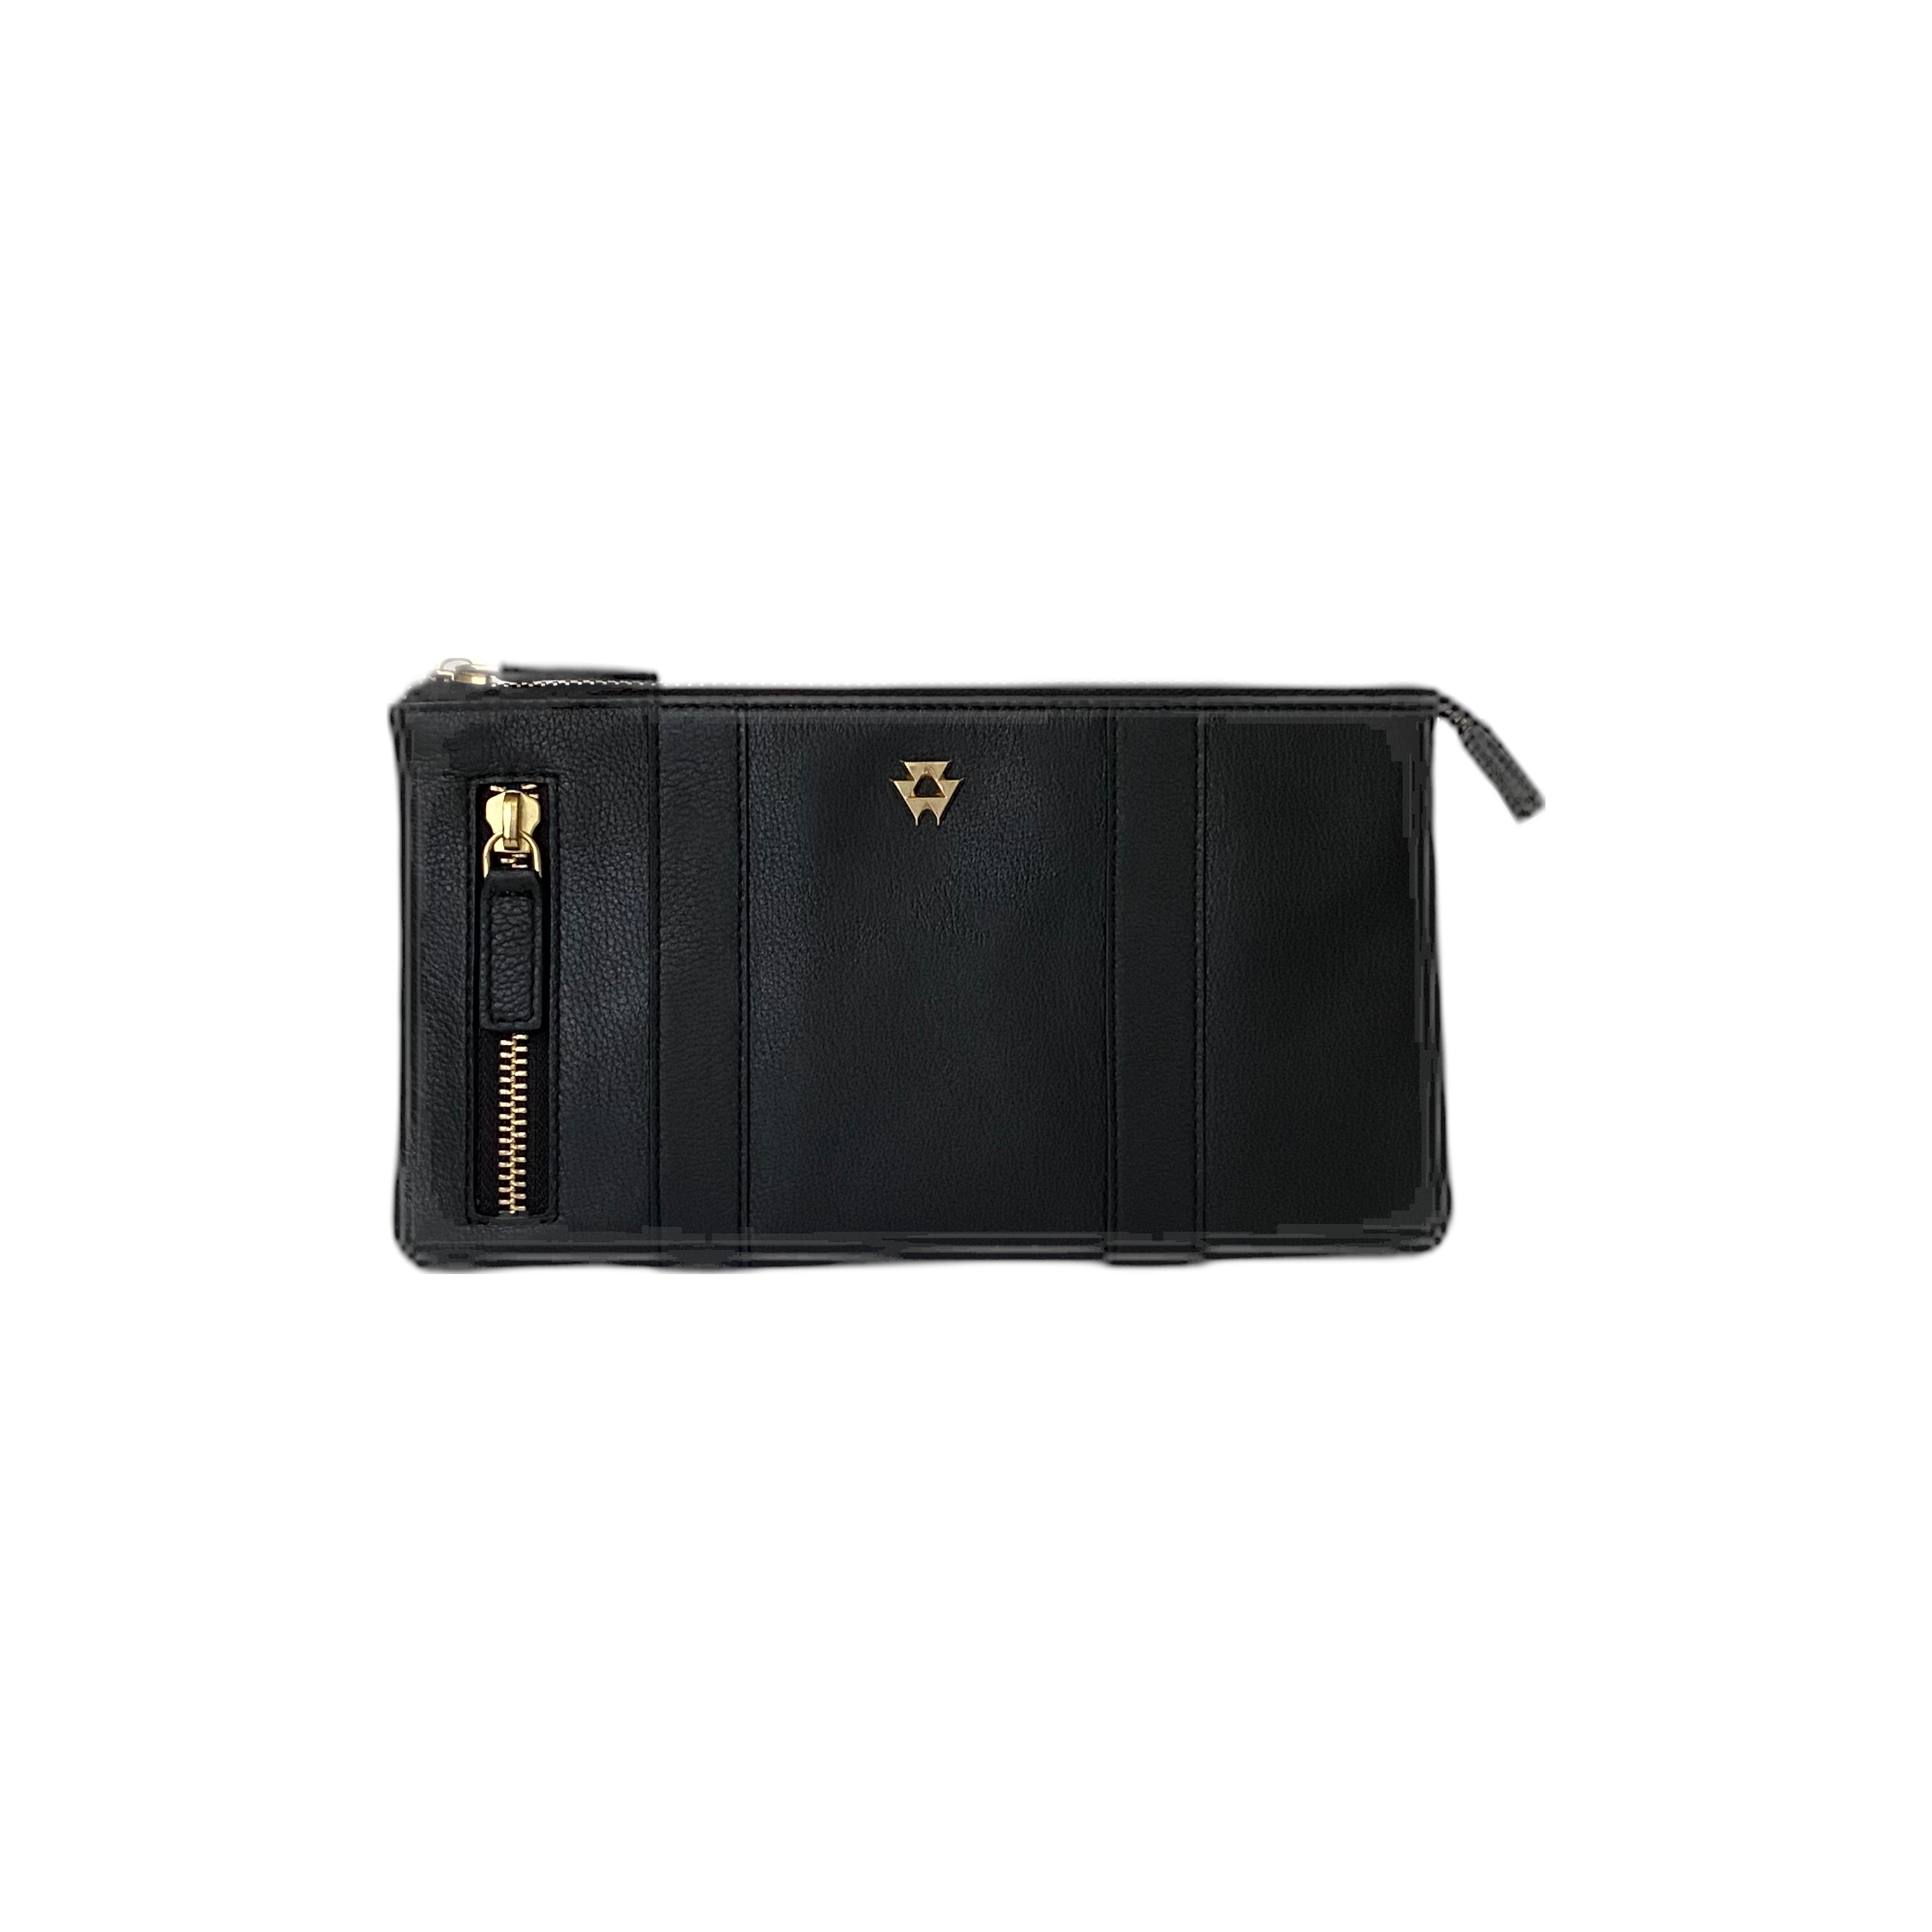 Noha Women's Leather Slim Wallets, Black and Tan, Versatile — Noha Nadler